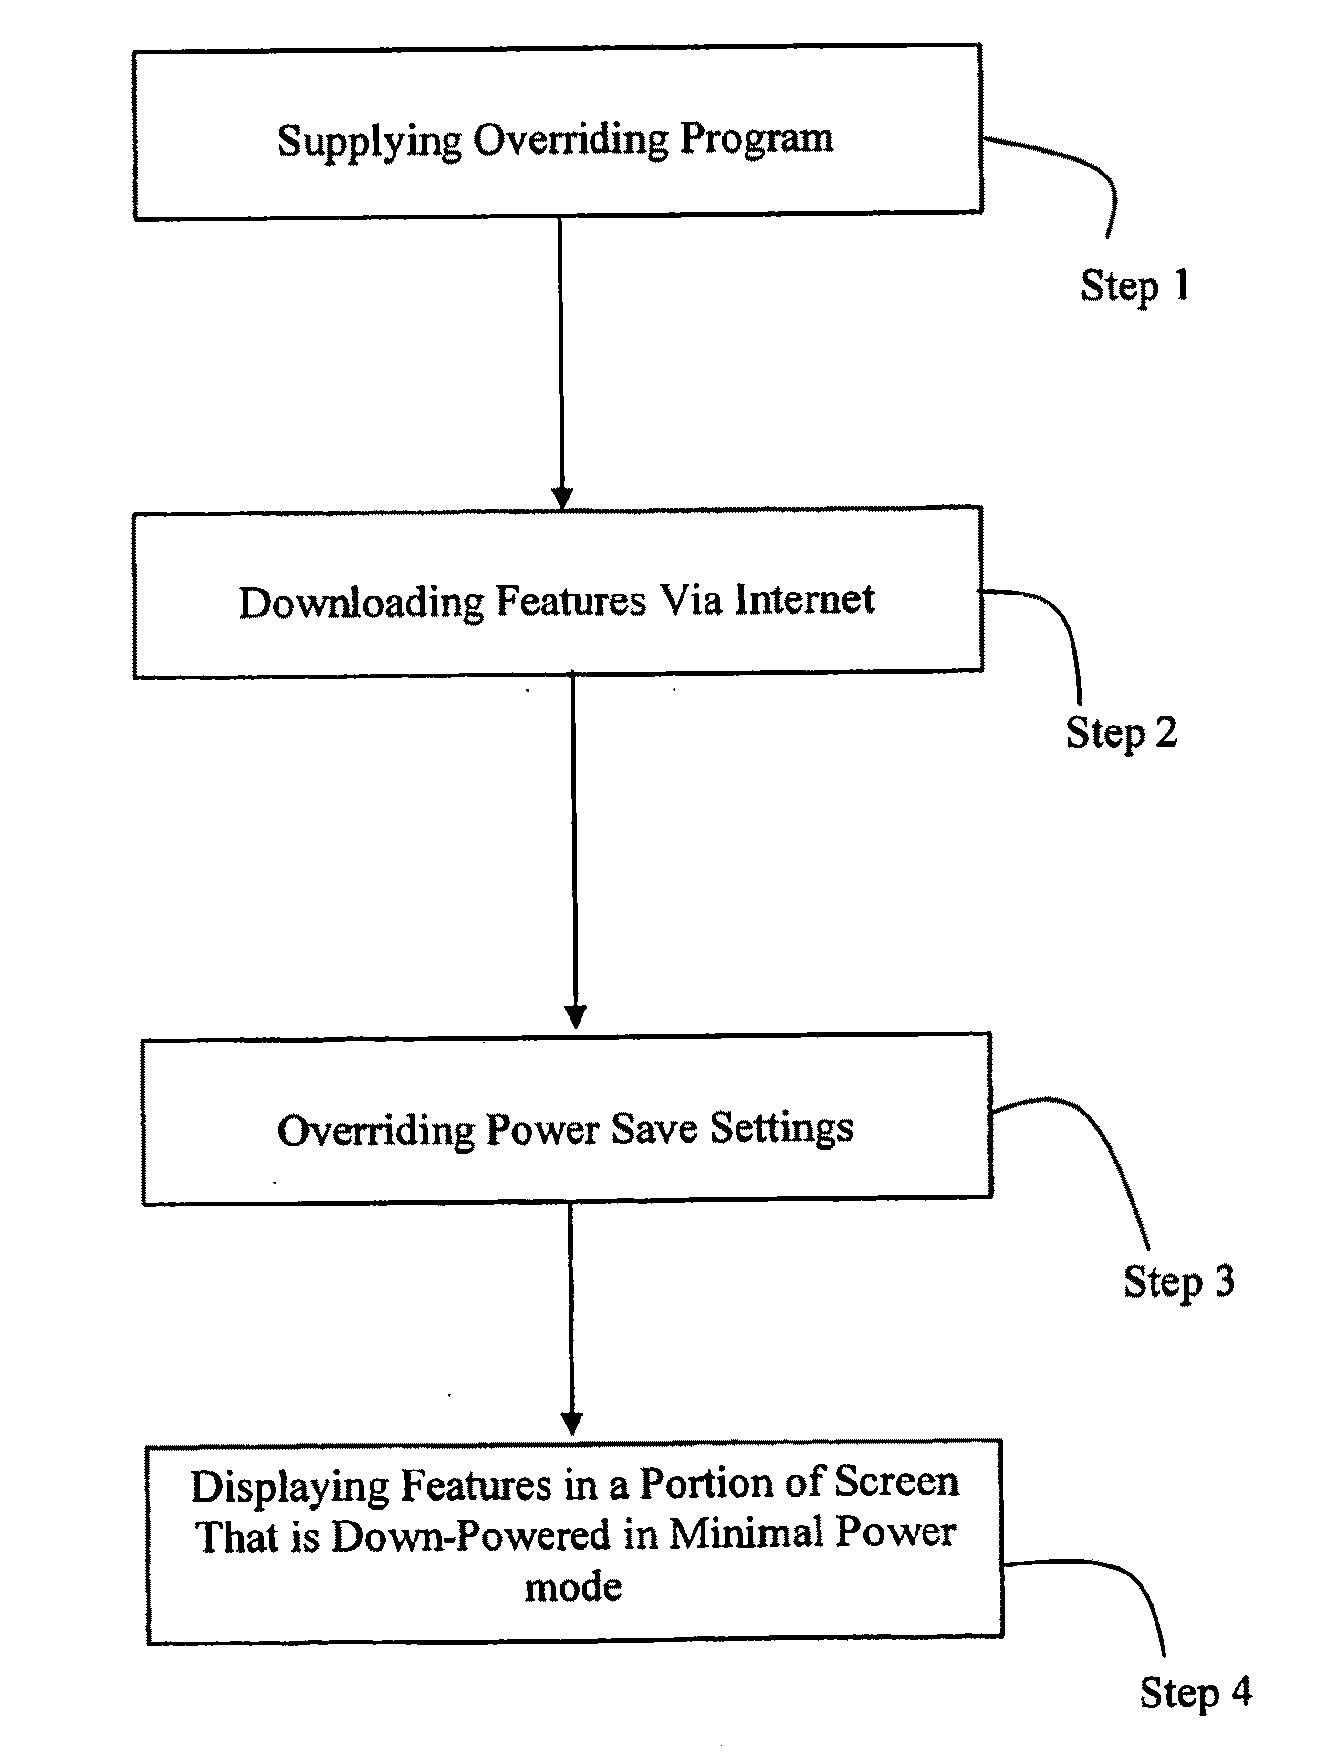 Mobile phone system and method